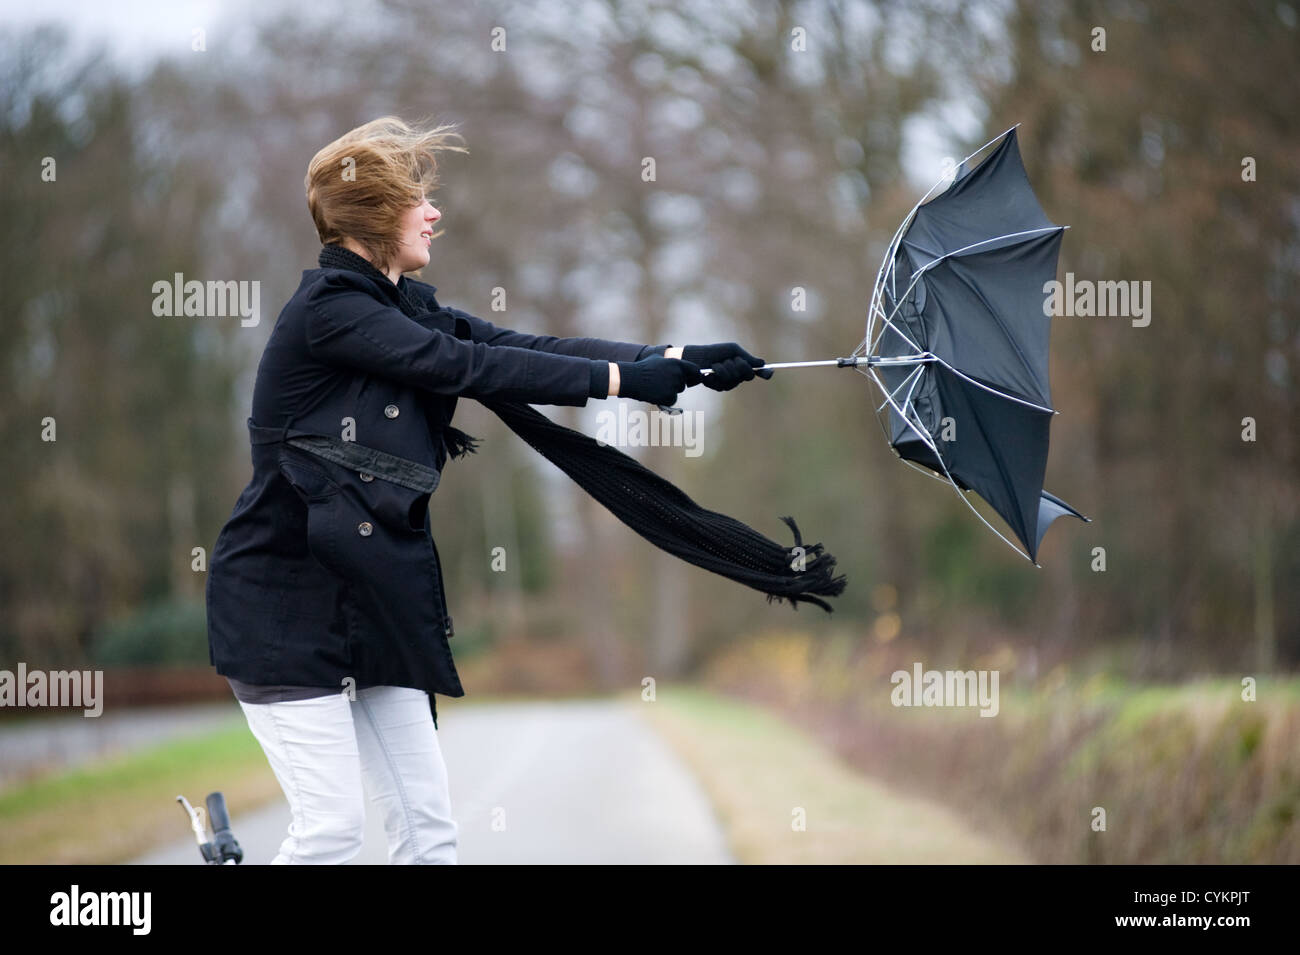 A young woman is fighting against the storm with her umbrella Stock Photo